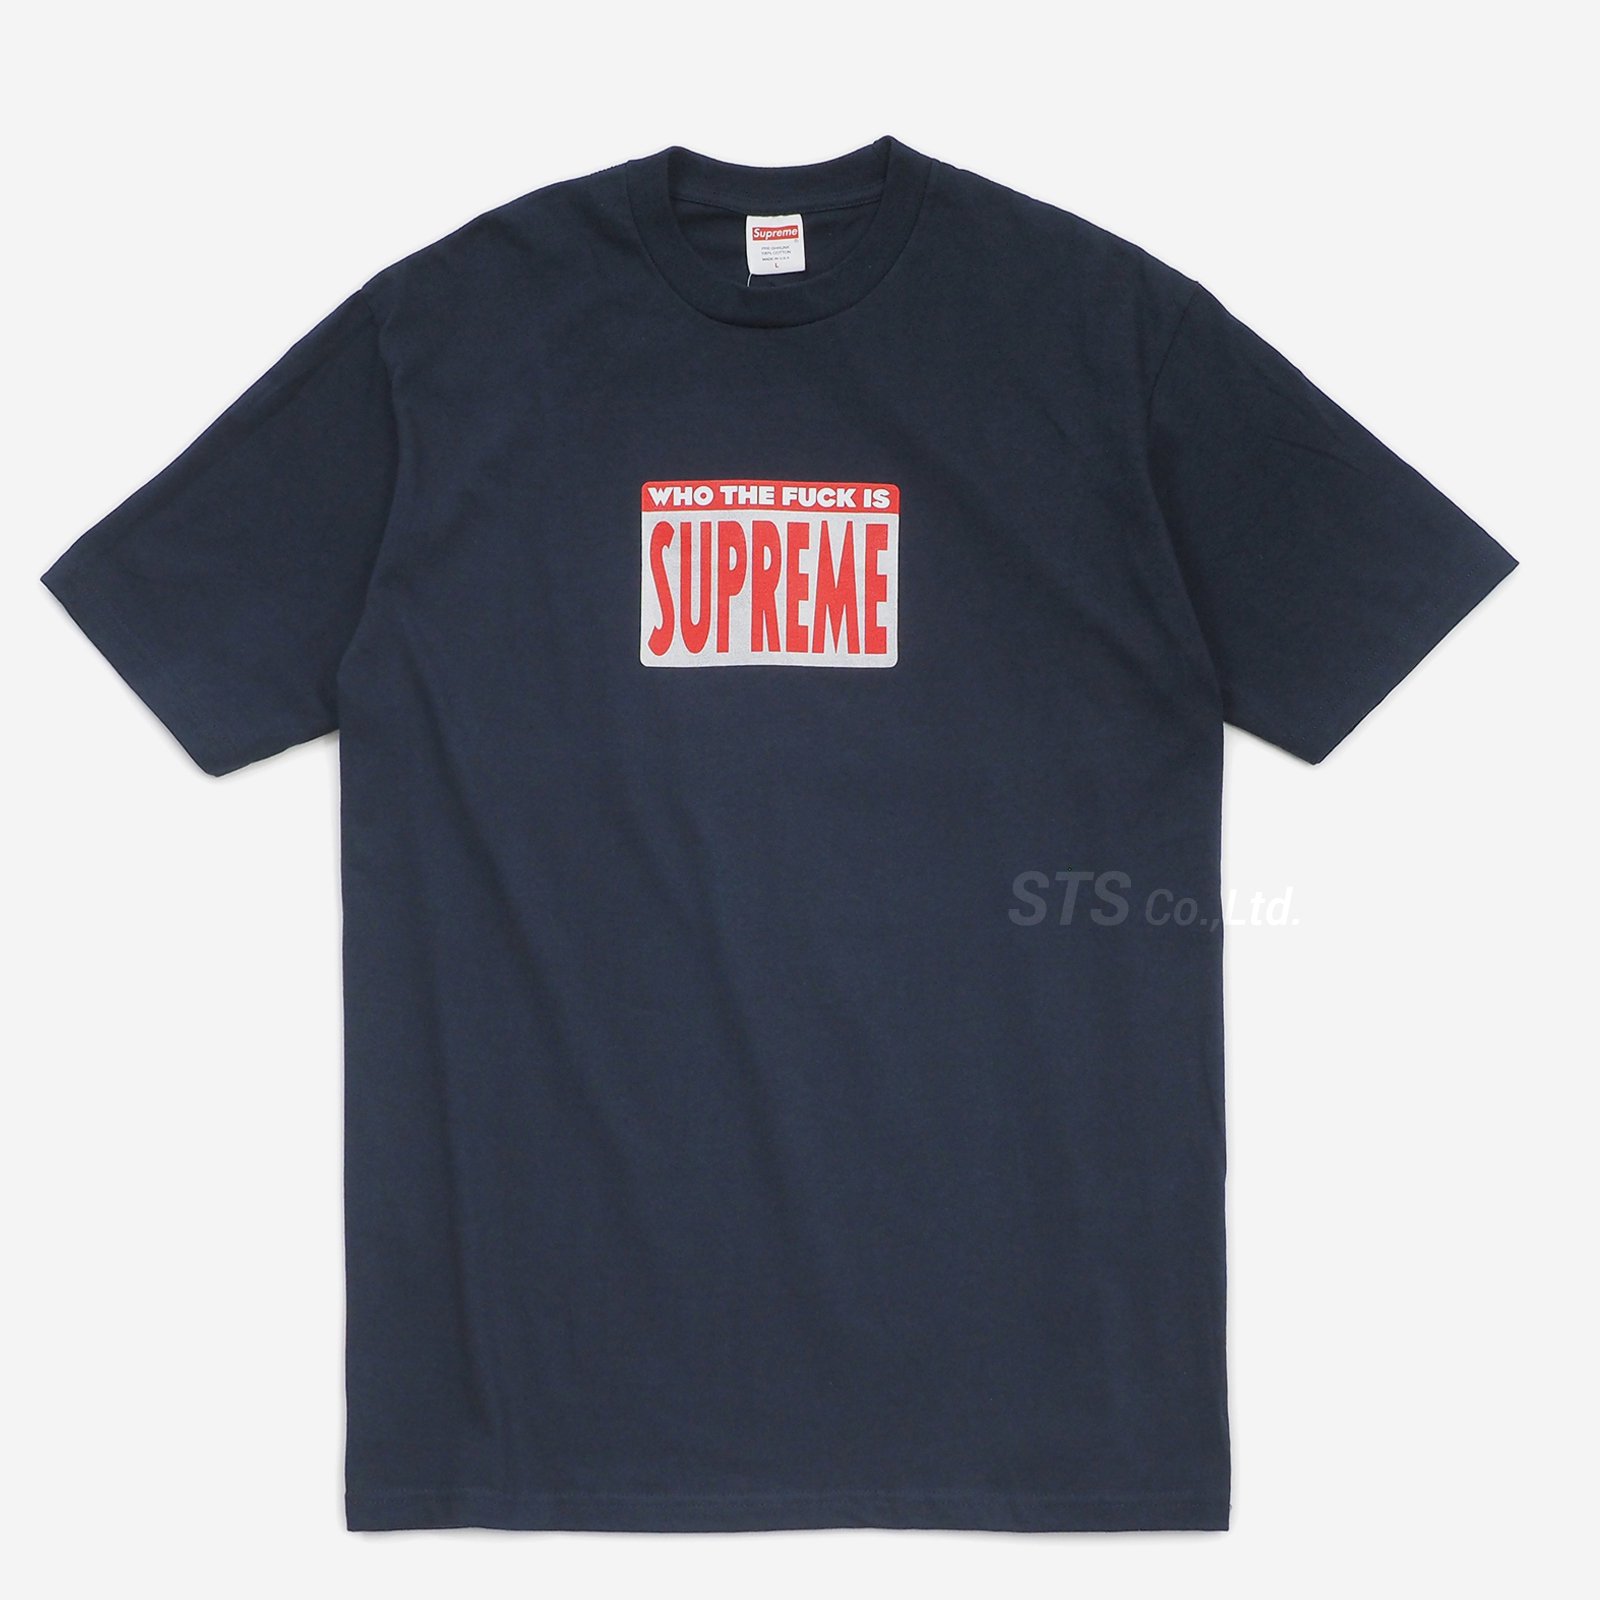 Tシャツ/カットソー(半袖/袖なし)supreme Who the fuck tee